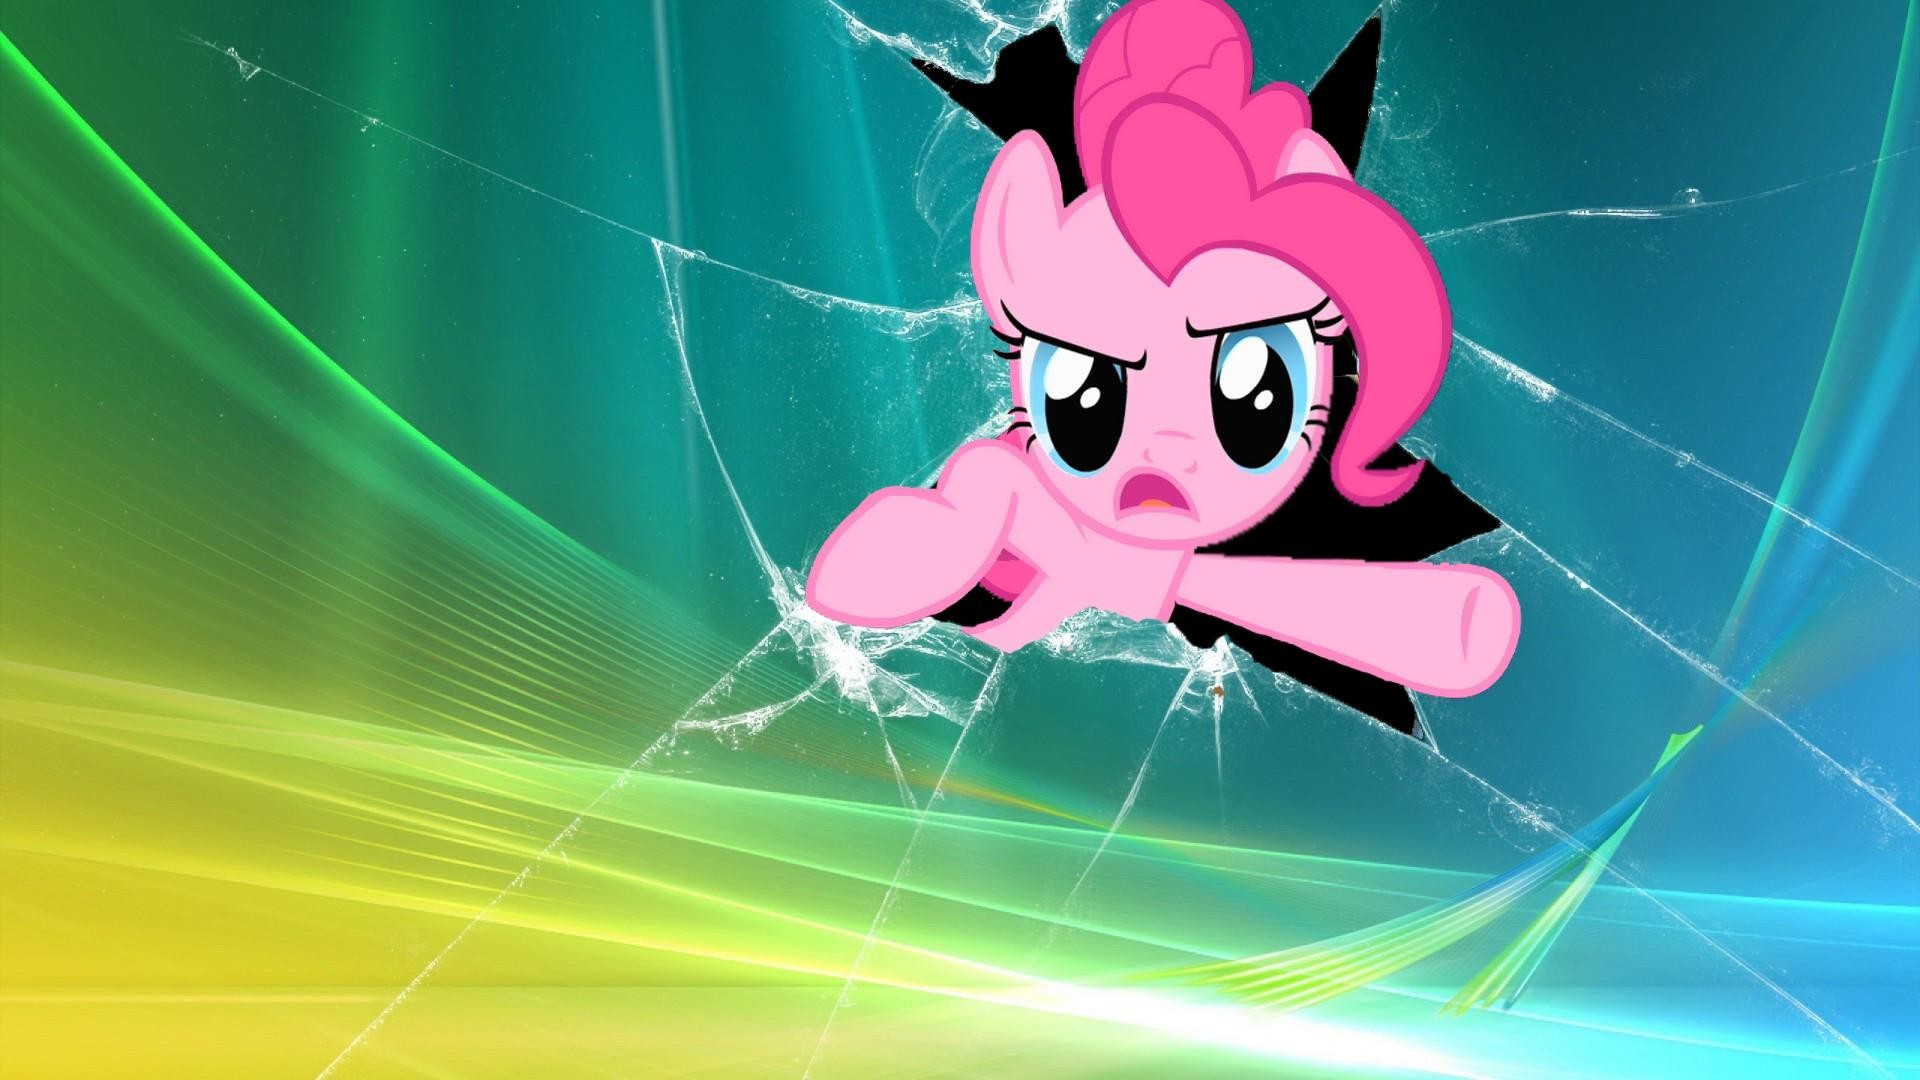 1920x1080 My Little Pony Live Wallpaper | HD Wallpapers | Pinterest | Pony, Hd  wallpaper and Wallpaper